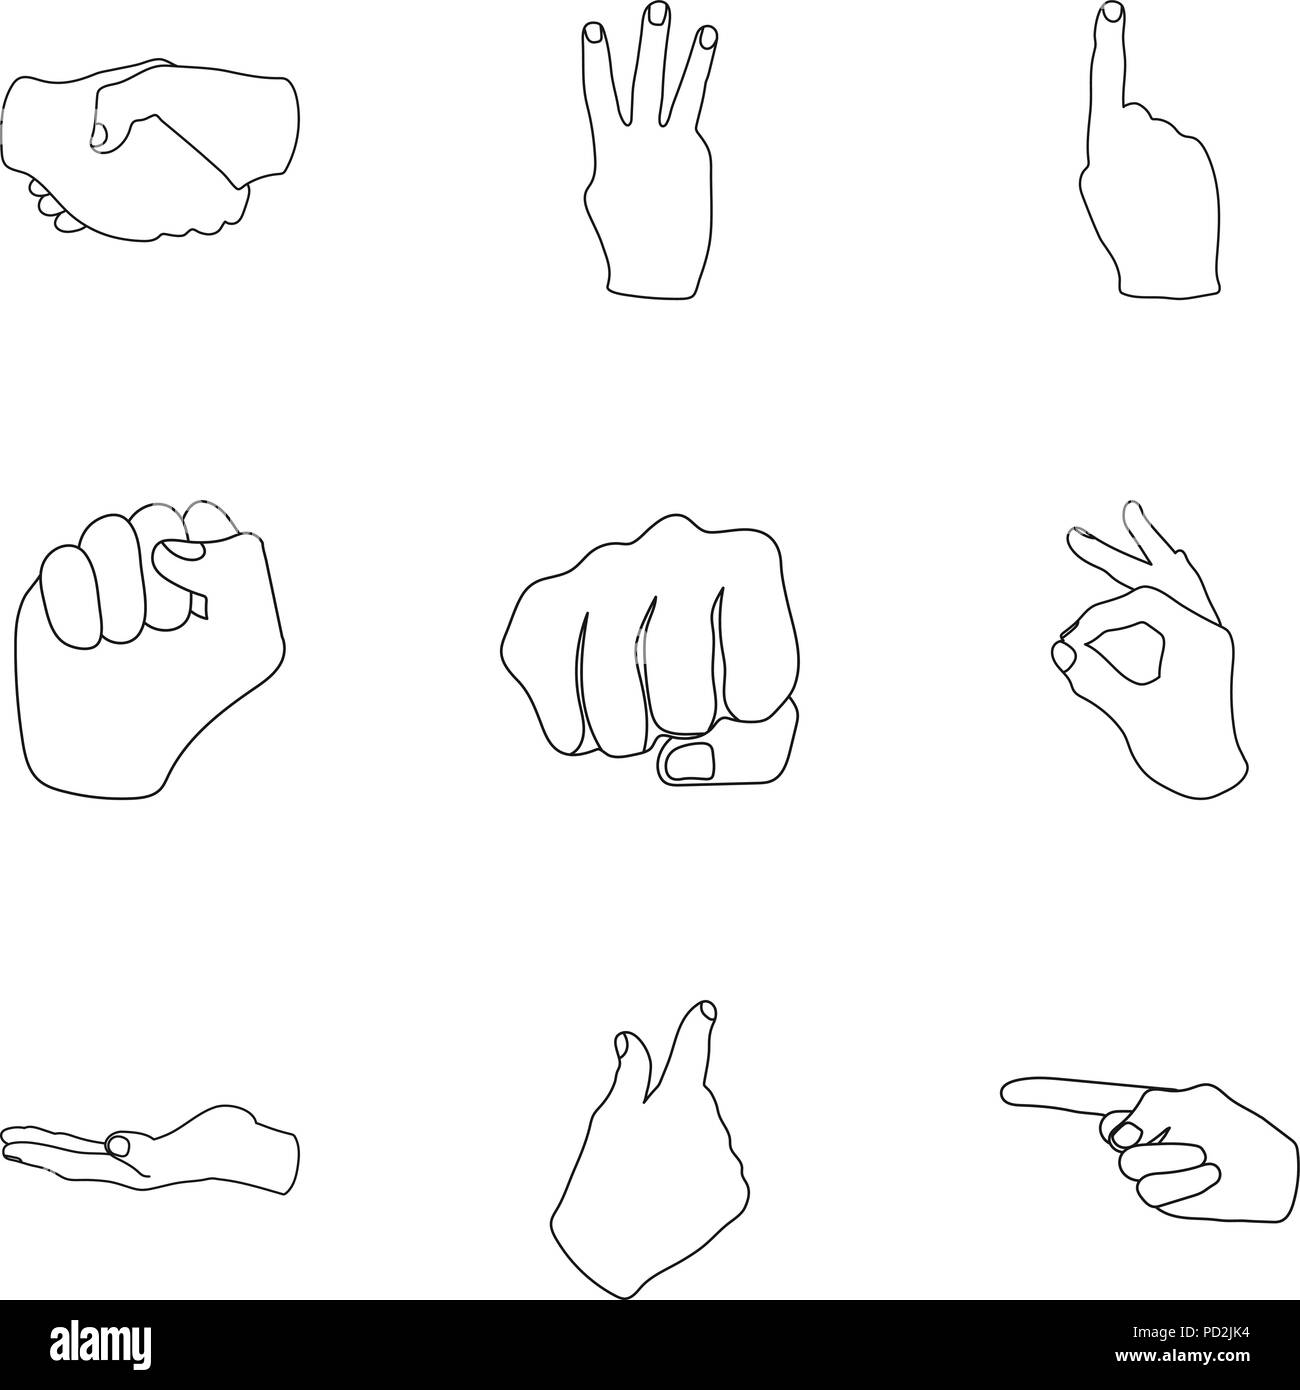 Anime Hand Gestures Vector Images over 4600